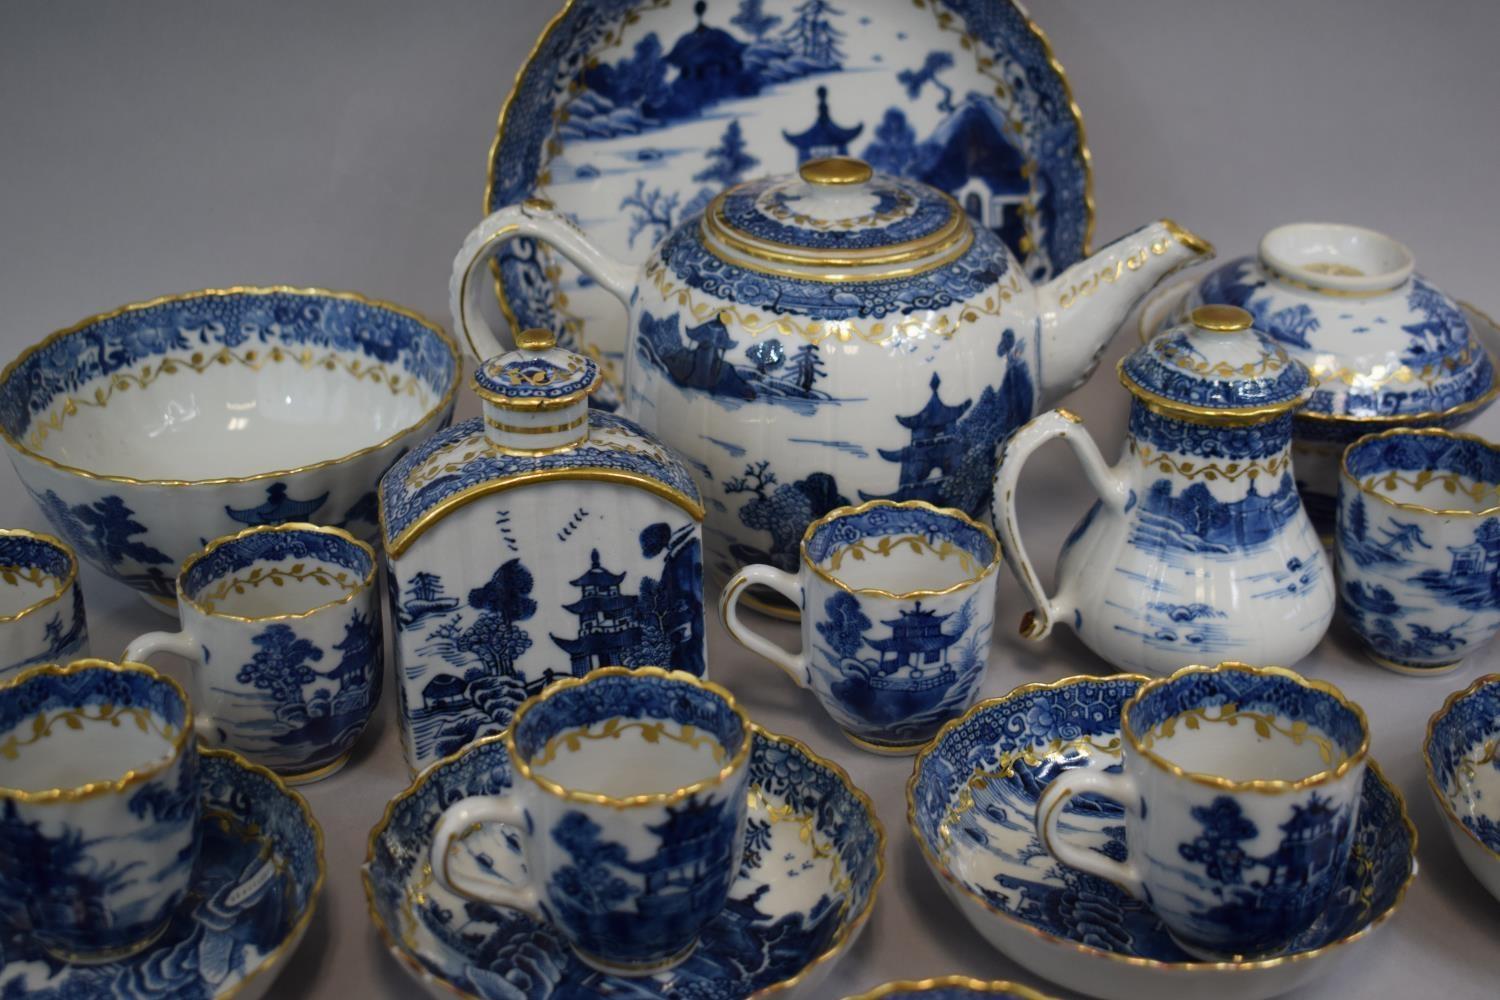 A Chinese Export Style Blue and White Pagoda Pattern Tea Set with Gilt Highlights Comprising Tea - Image 3 of 4